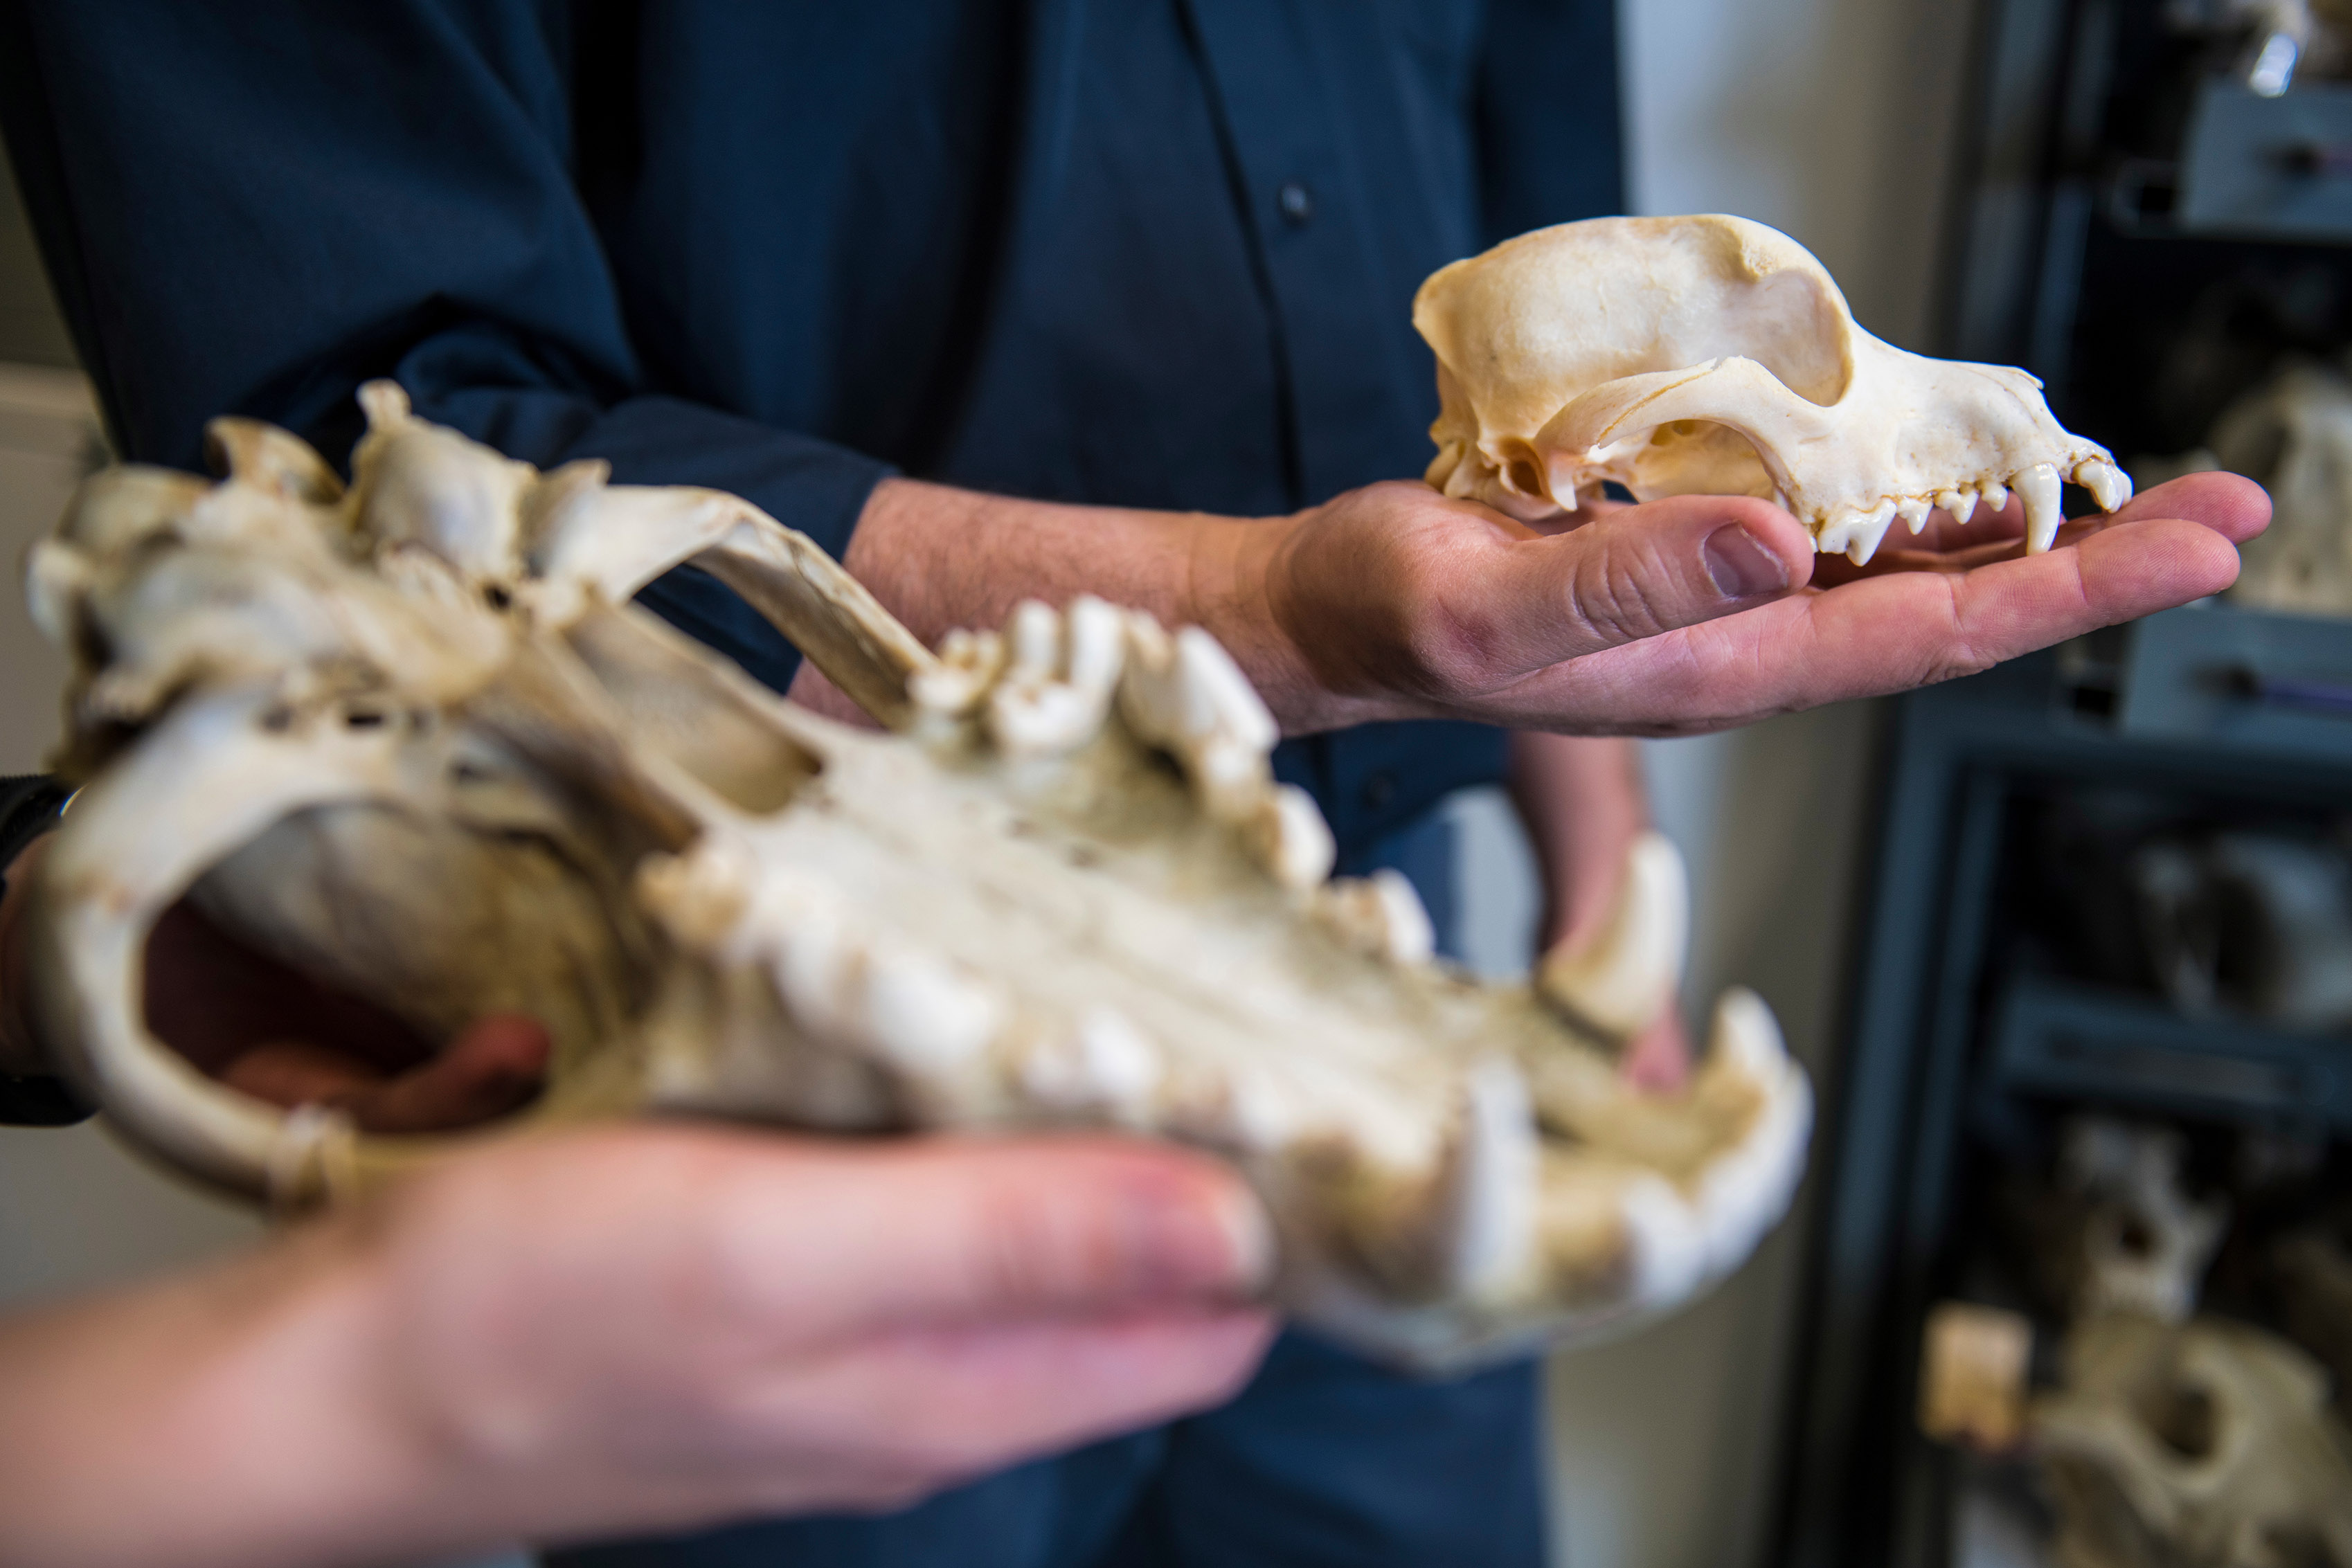 Two individuals hold small animal skulls in their hands.